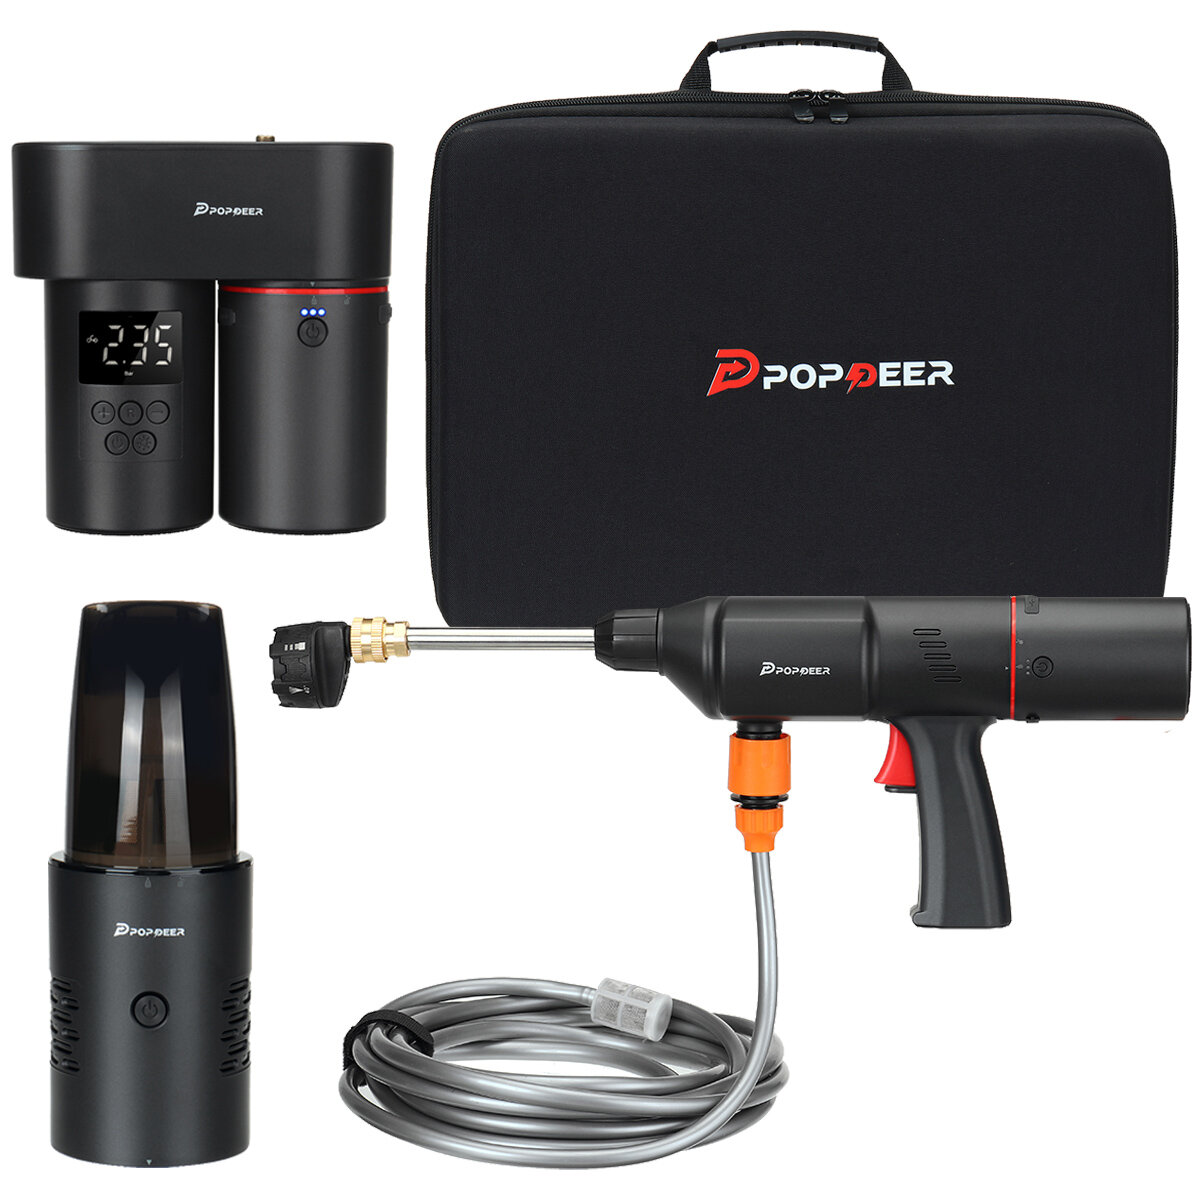 best price,popdeer,in,pump,car,wash,vacuum,cleaner,power,bank,charger,discount